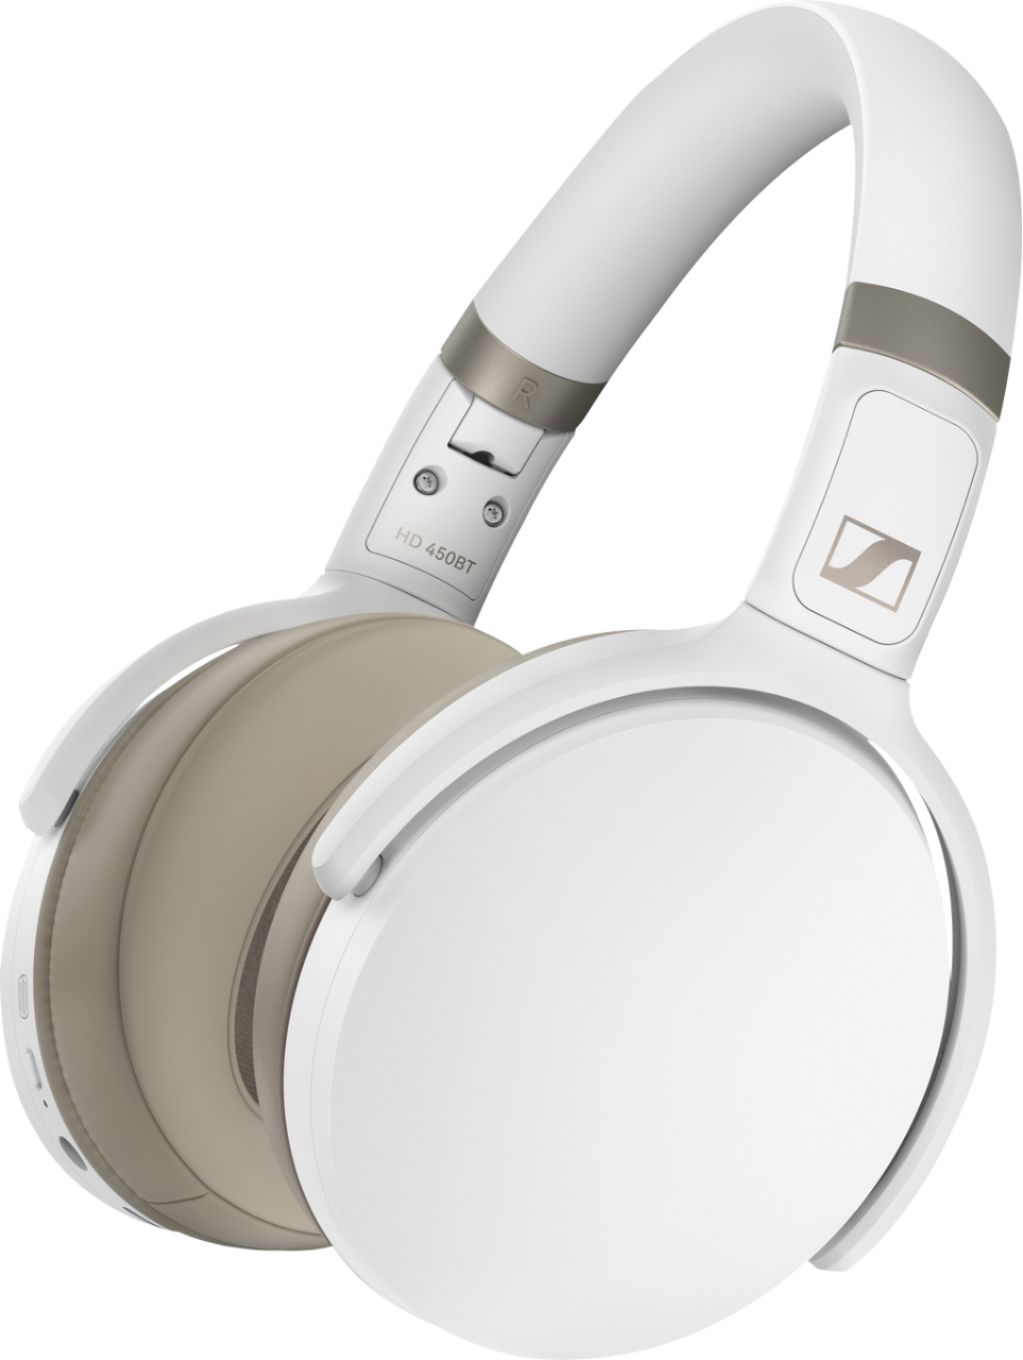 Angle View: Sennheiser - HD 450BT Wireless Noise Cancelling Over-the-Ear Headphones - White